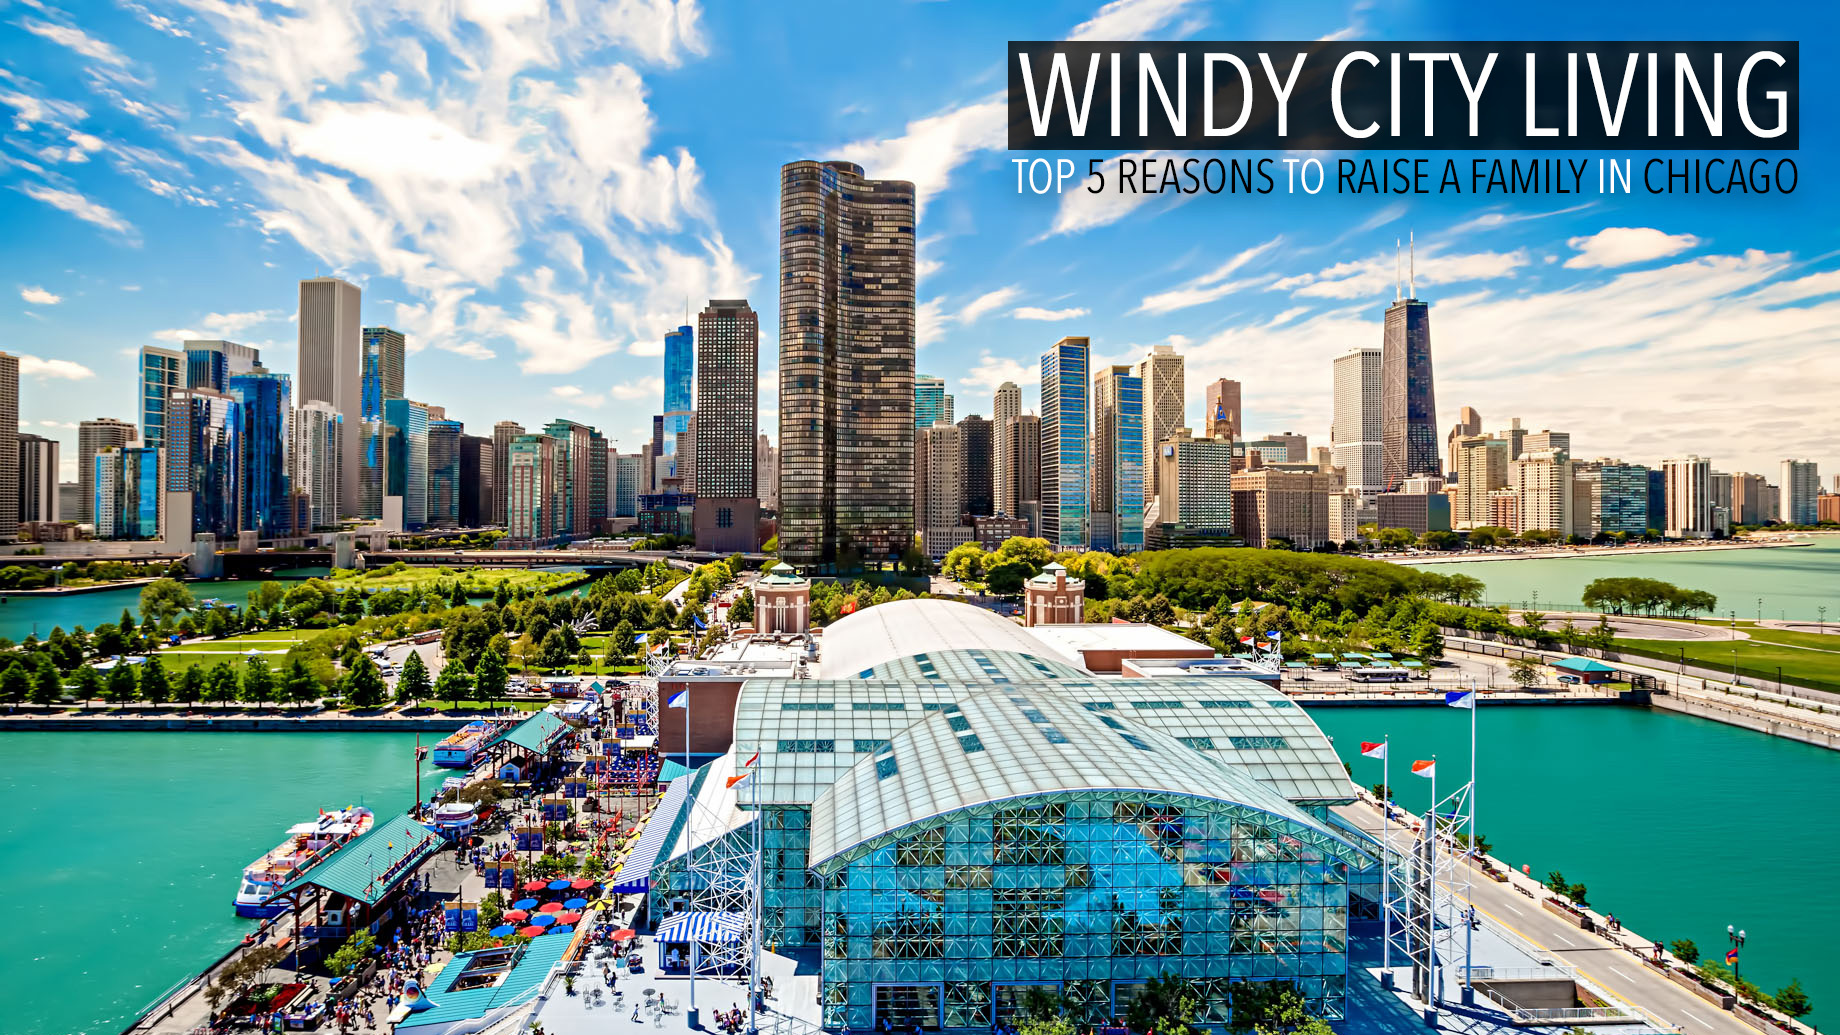 Windy City Living – Top 5 Reasons to Raise a Family in Chicago